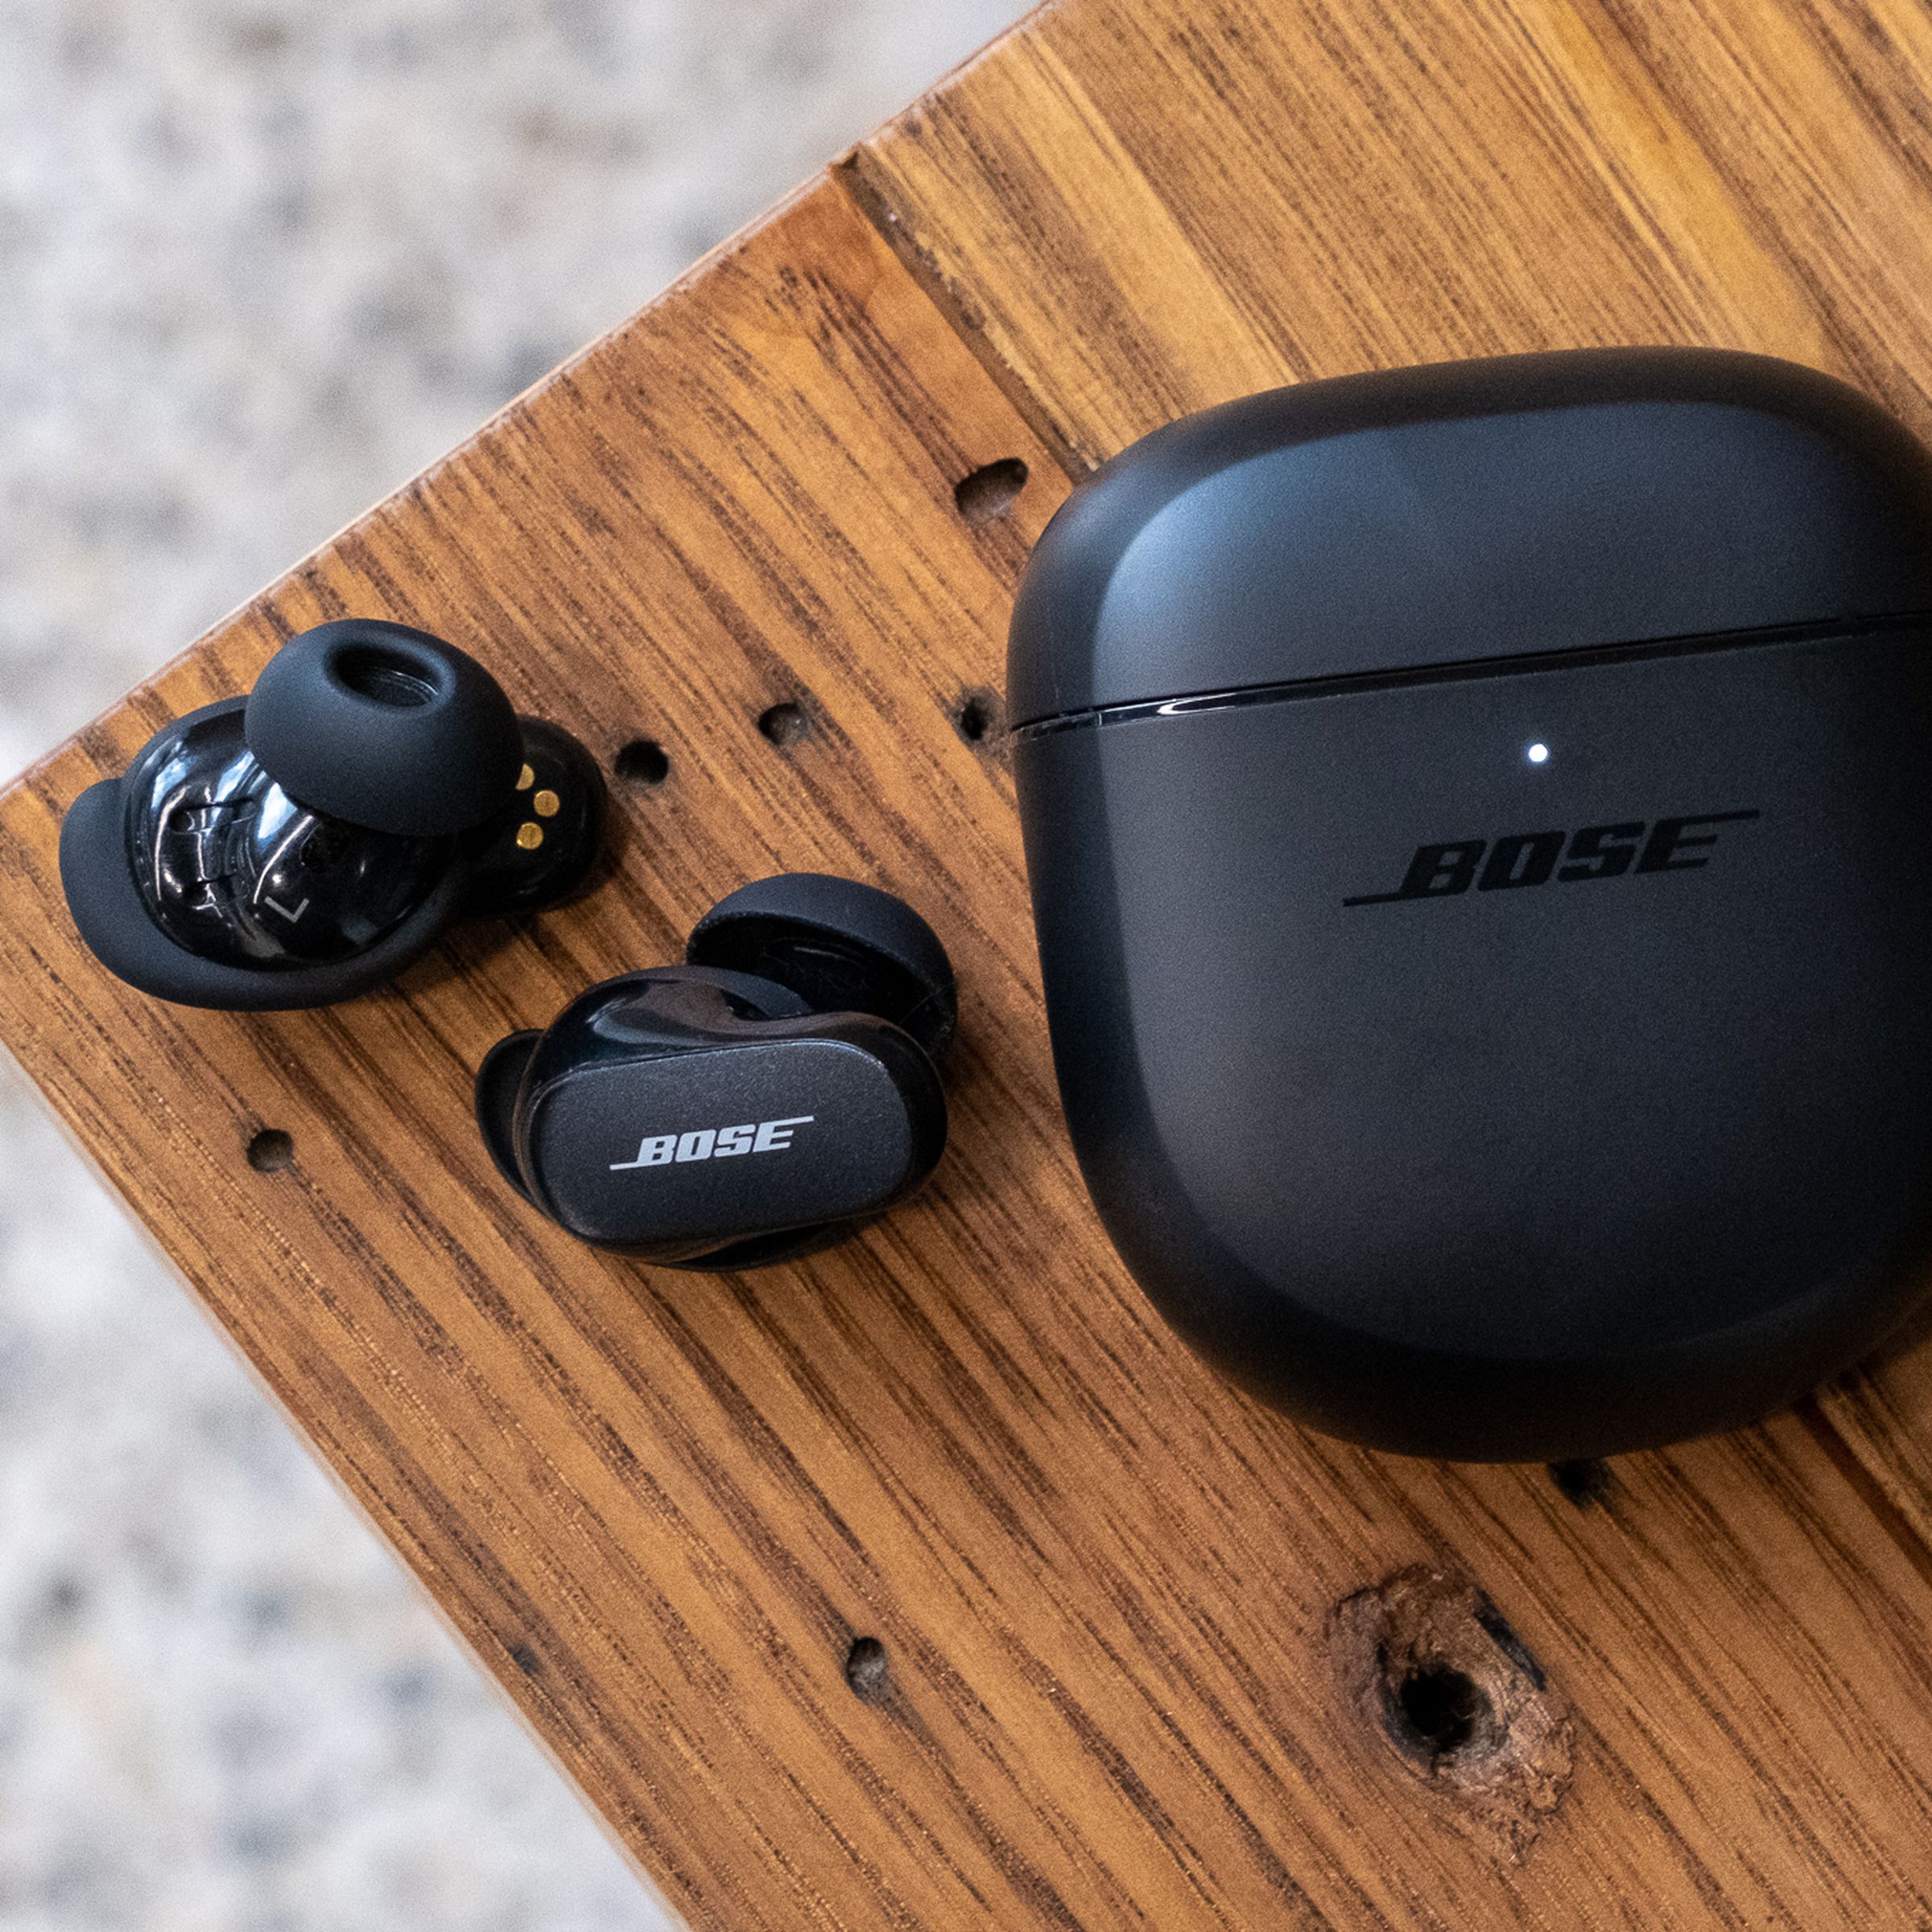 An overhead view of the Bose QuietComfort Earbuds II on a wooden table.